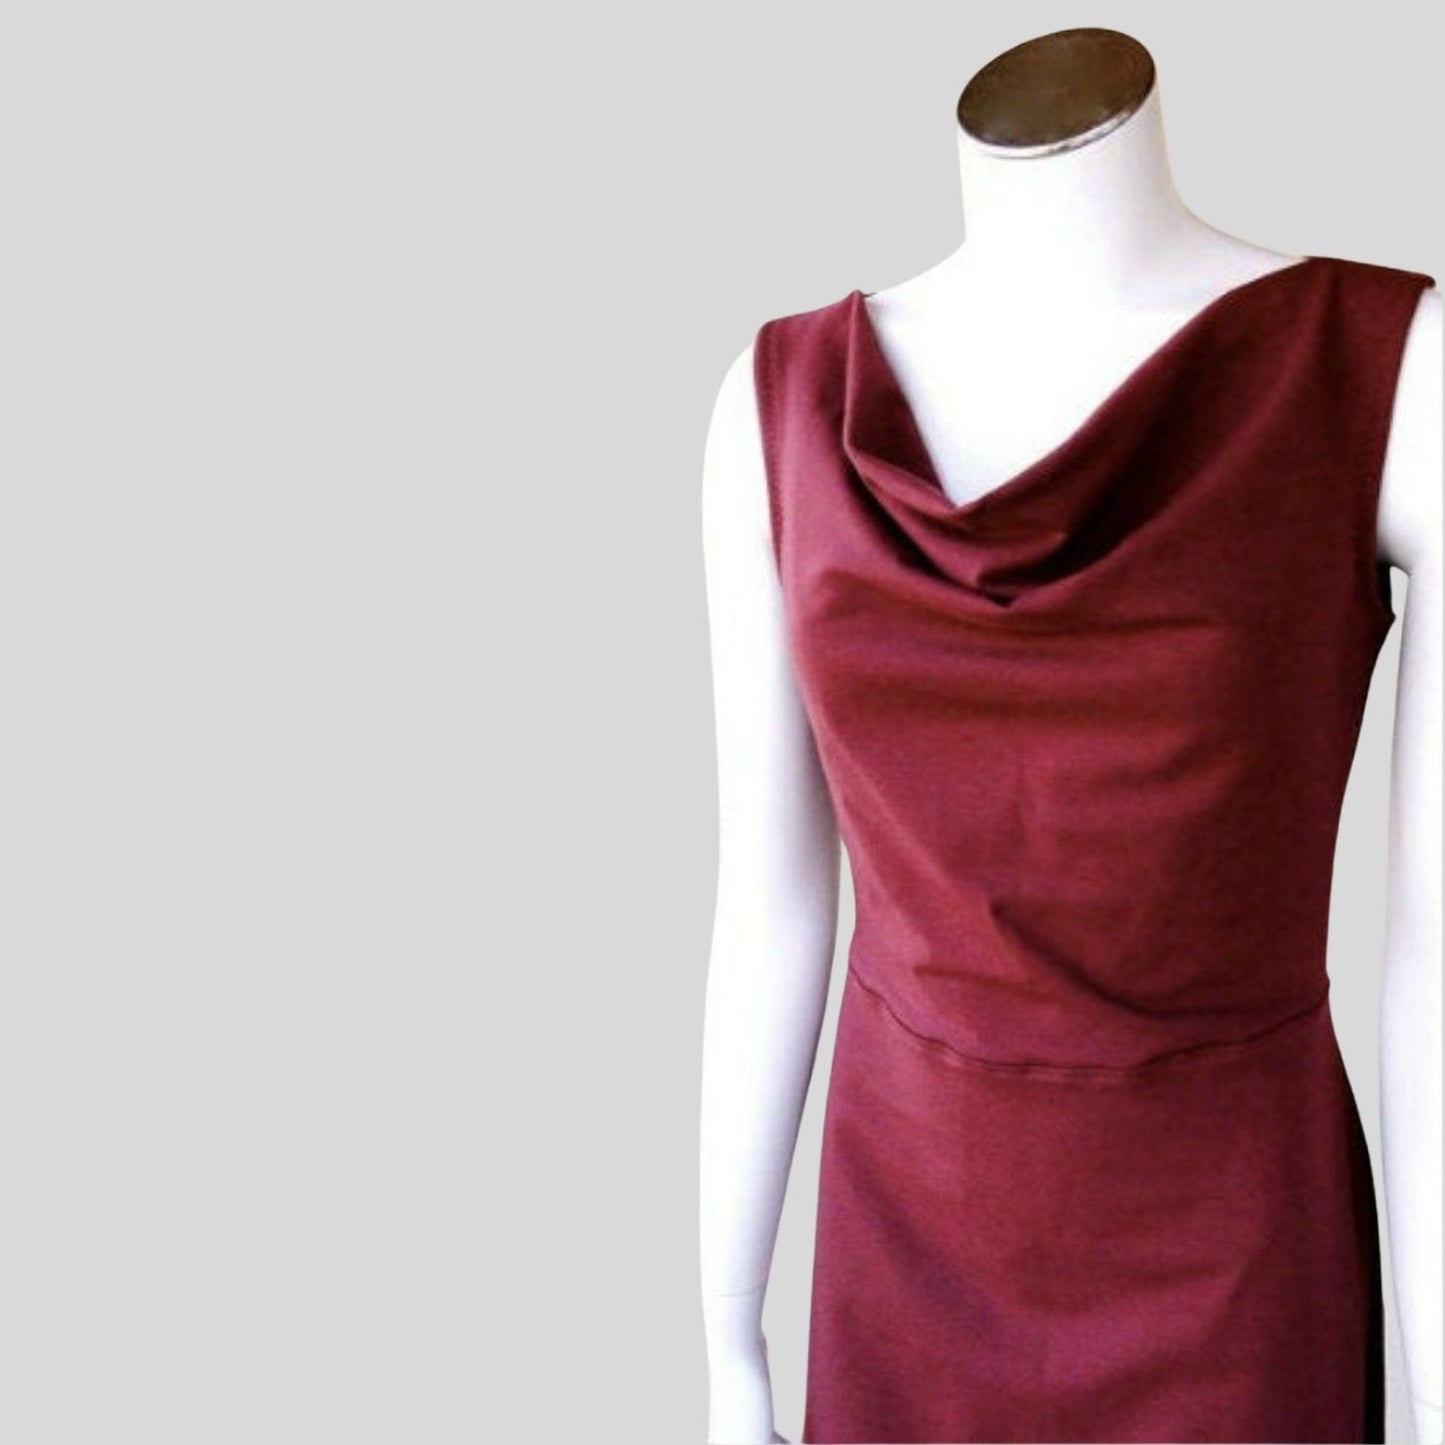 Long sleeveless boatneck dress | Buy made in Canada organic cotton dresses